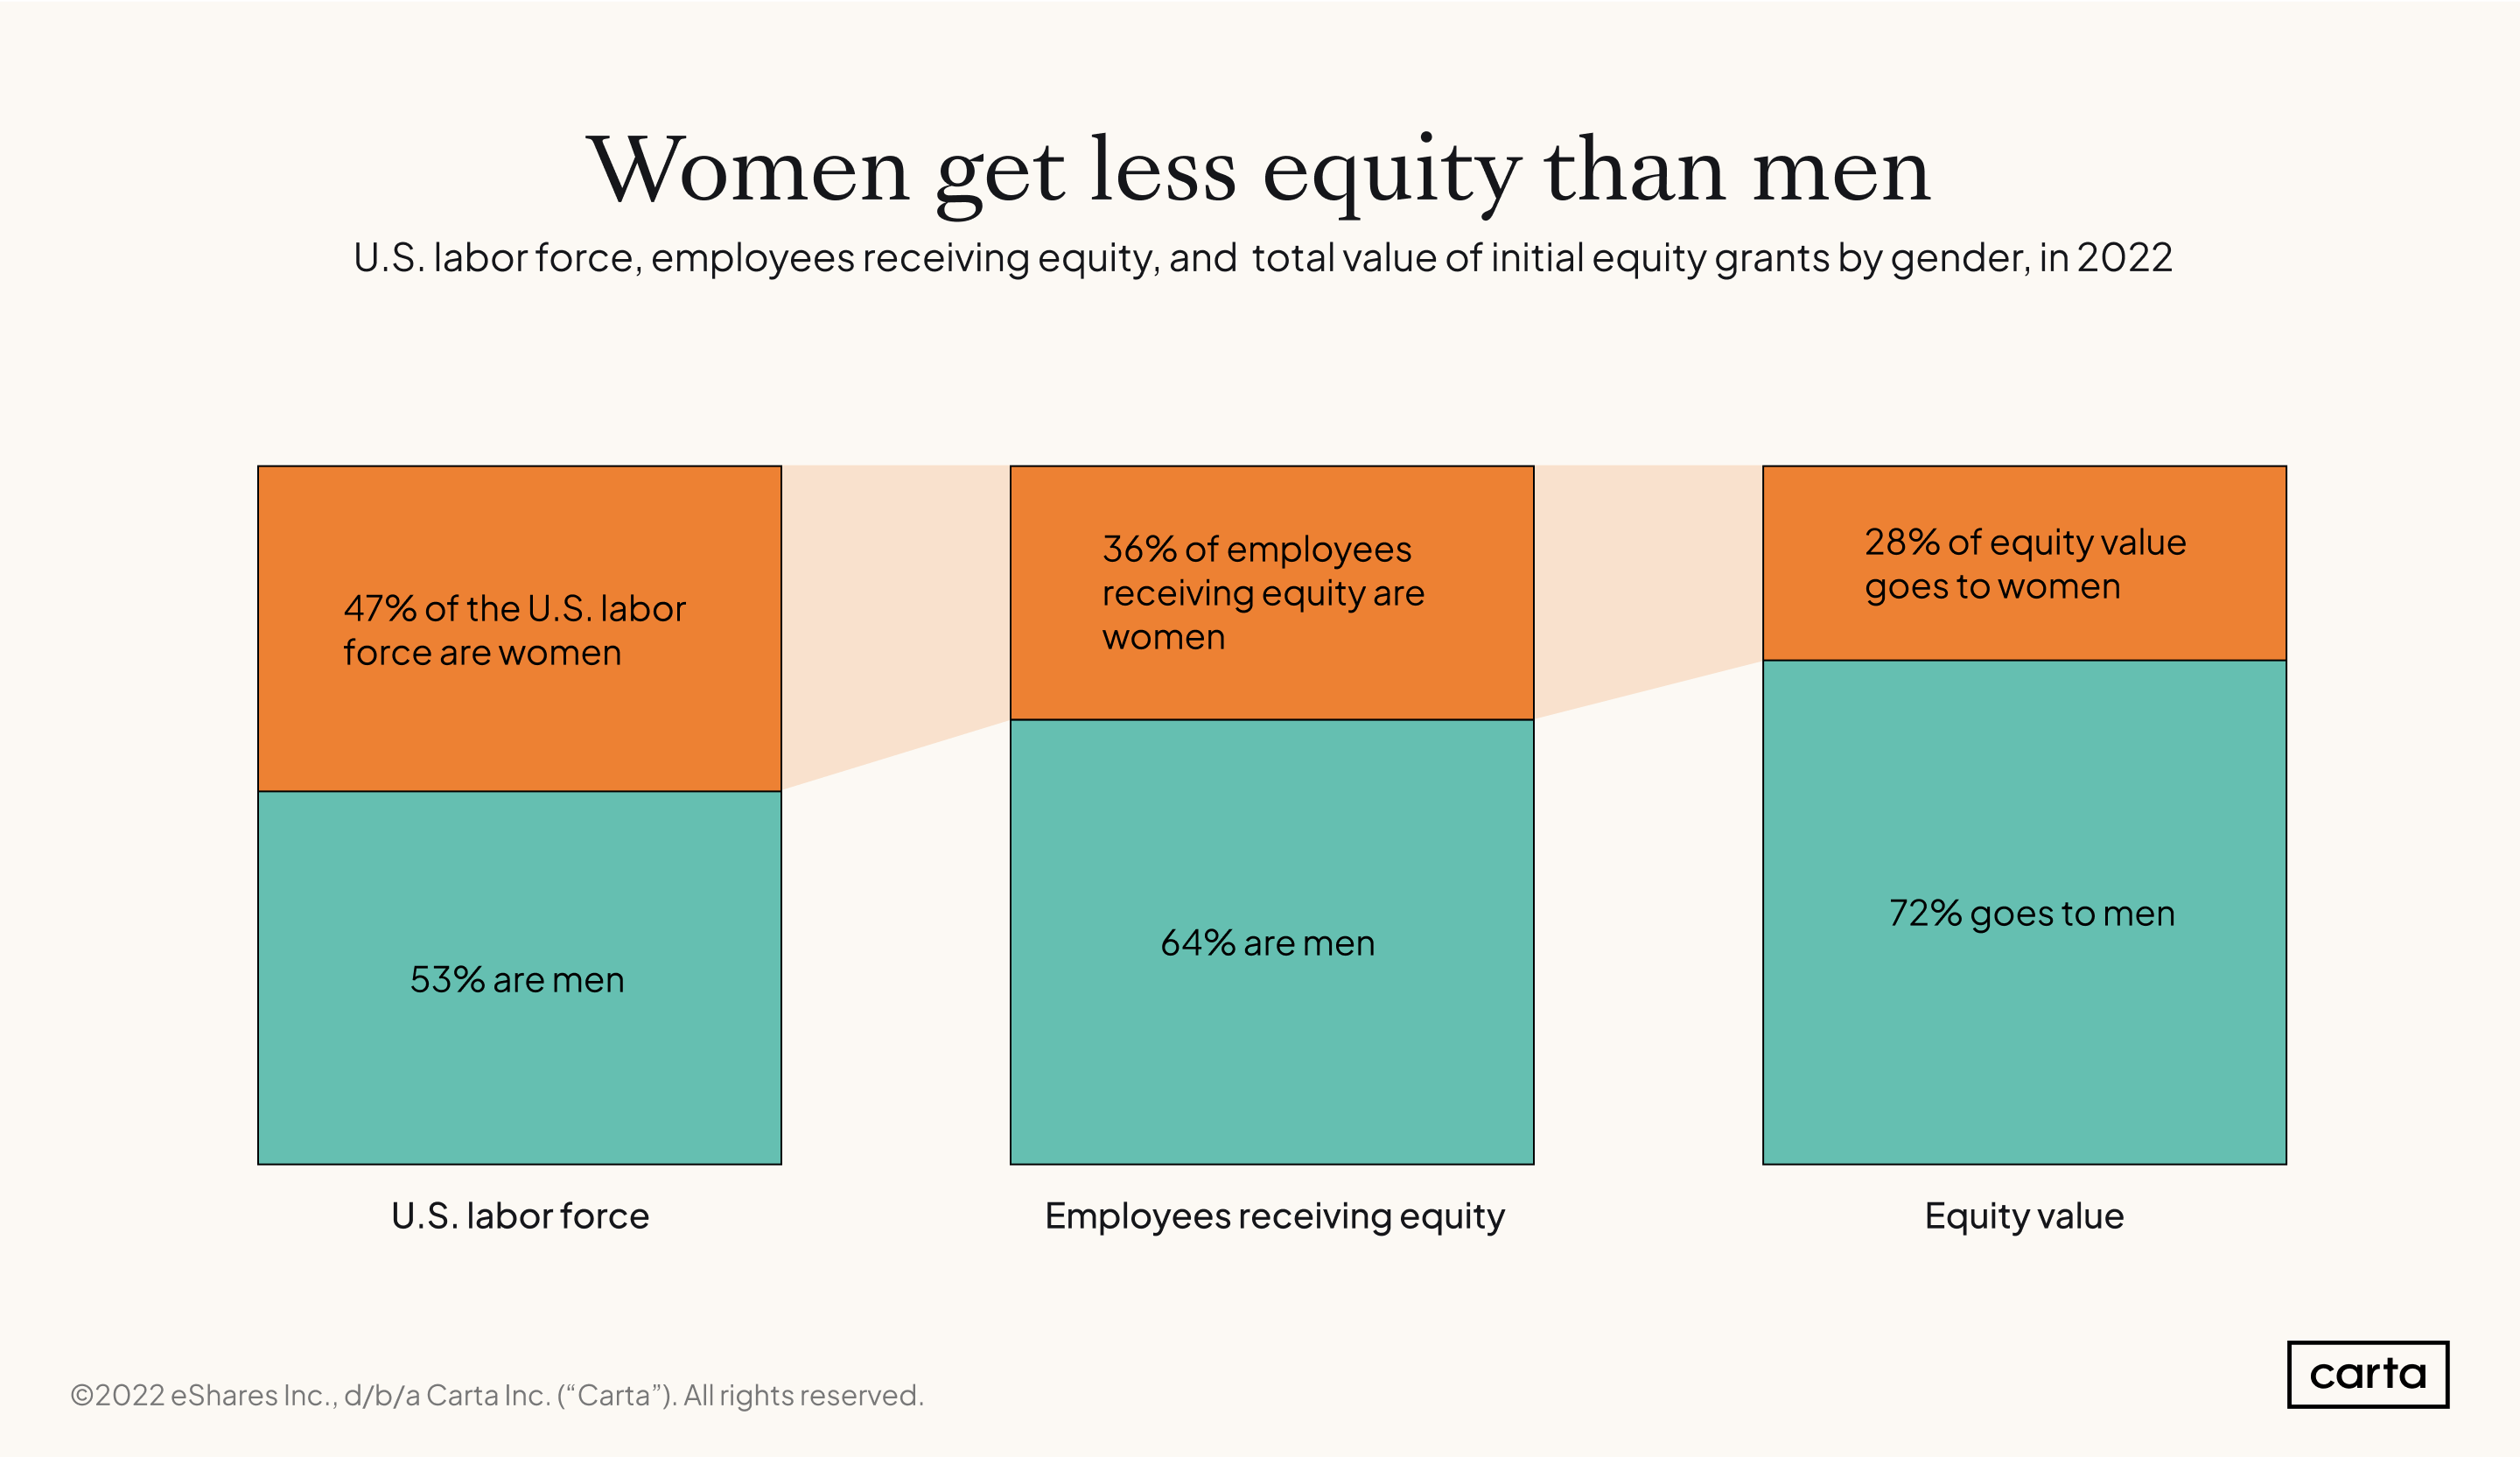 CES Equity and number of employees by gender